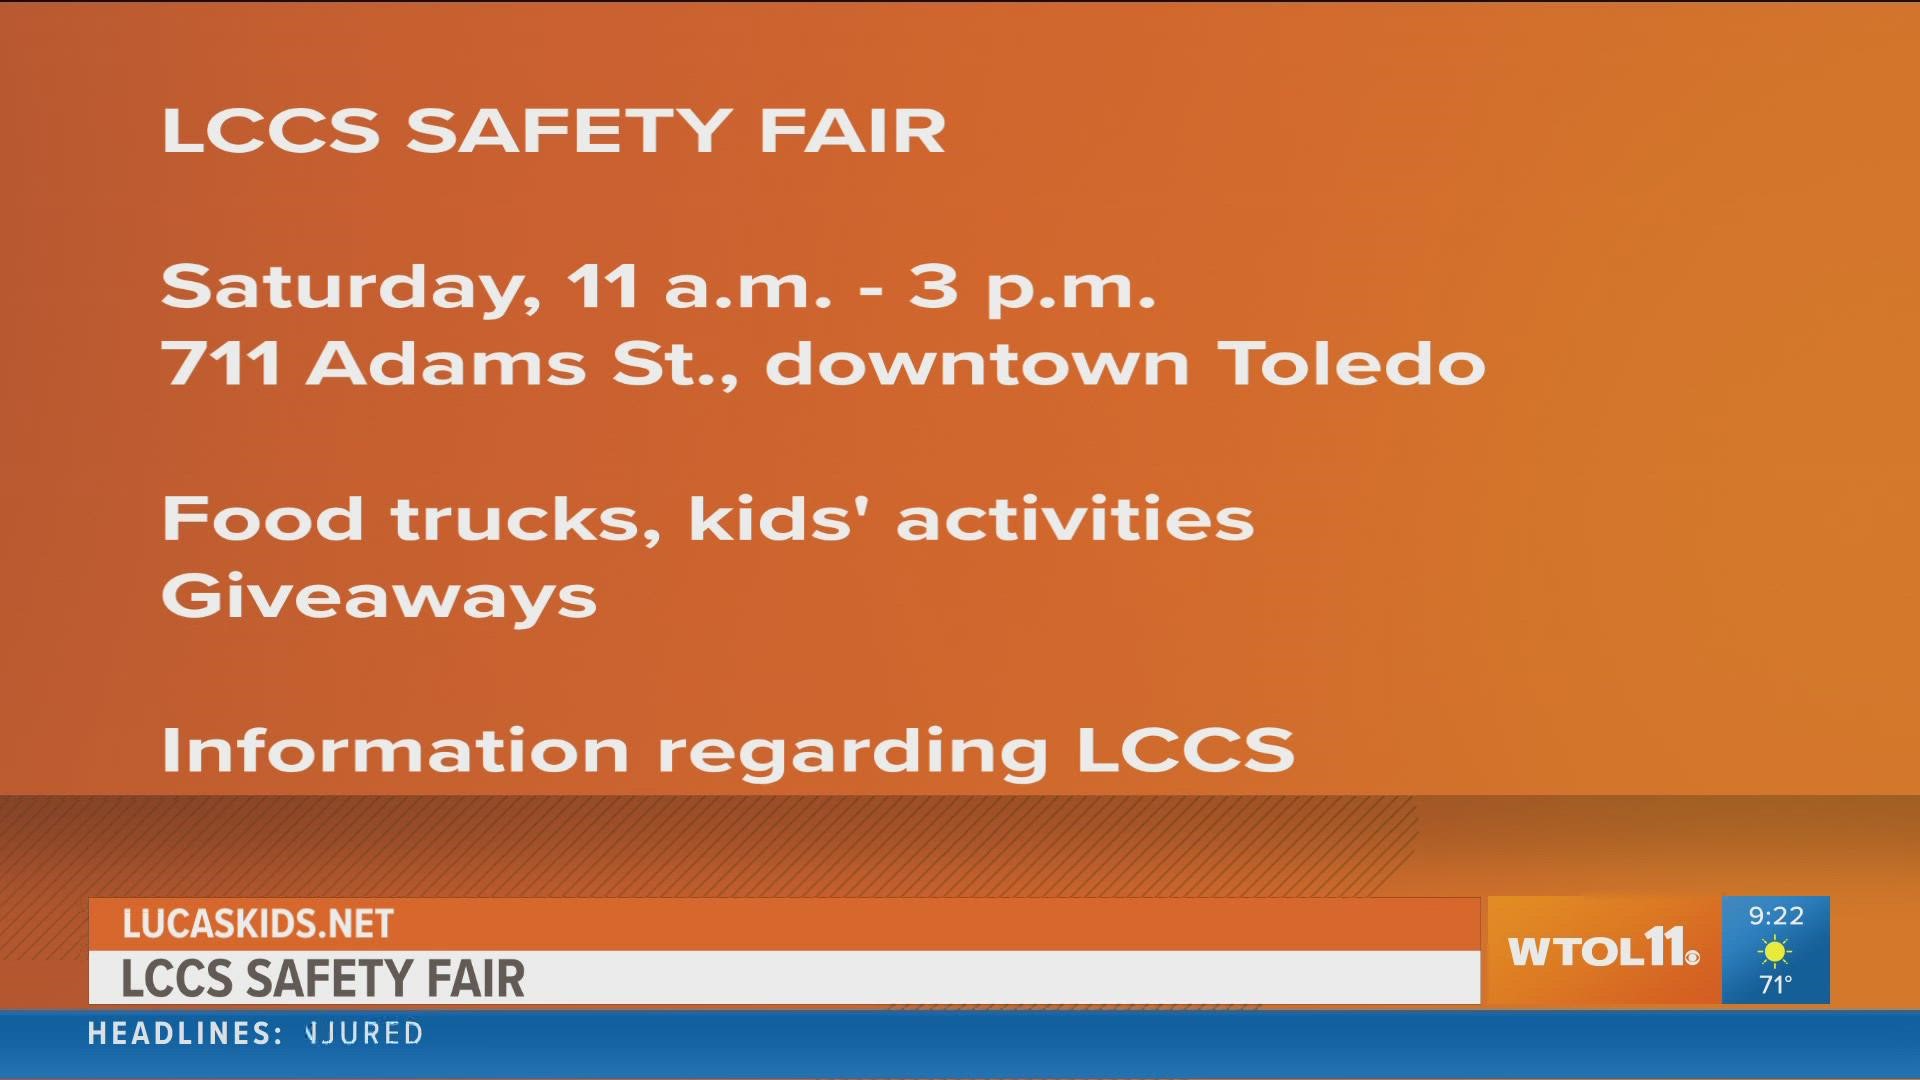 Melonny King speaks about a safety fair featuring games, giveaways, food and information on Saturday from 11 a.m. to 3 p.m.